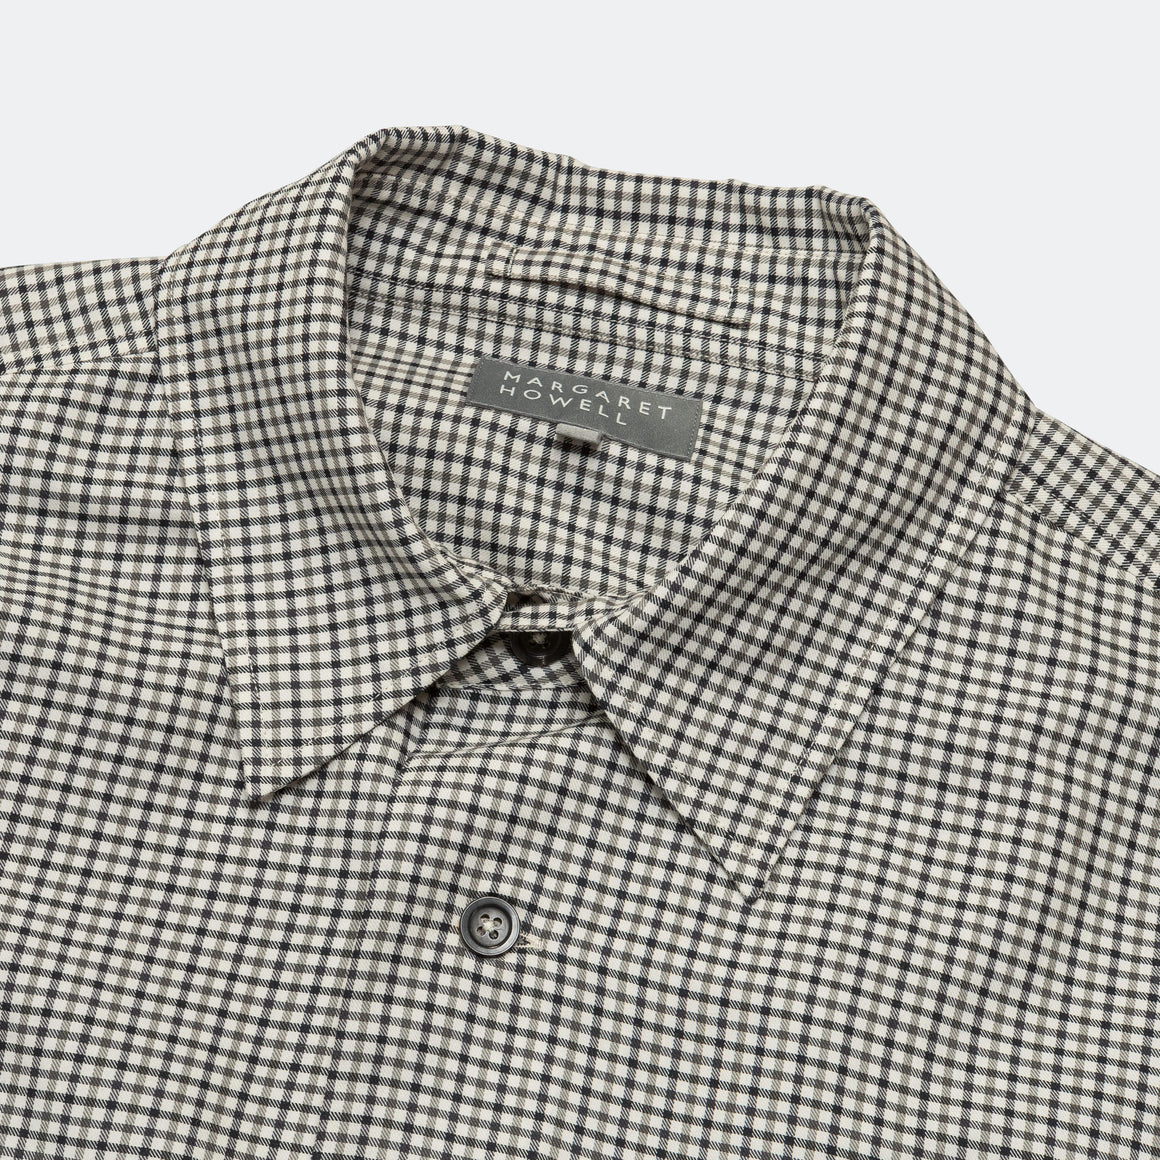 Margaret Howell - Two Pocket Shirt - Charcoal/Off White Gingham - UP THERE